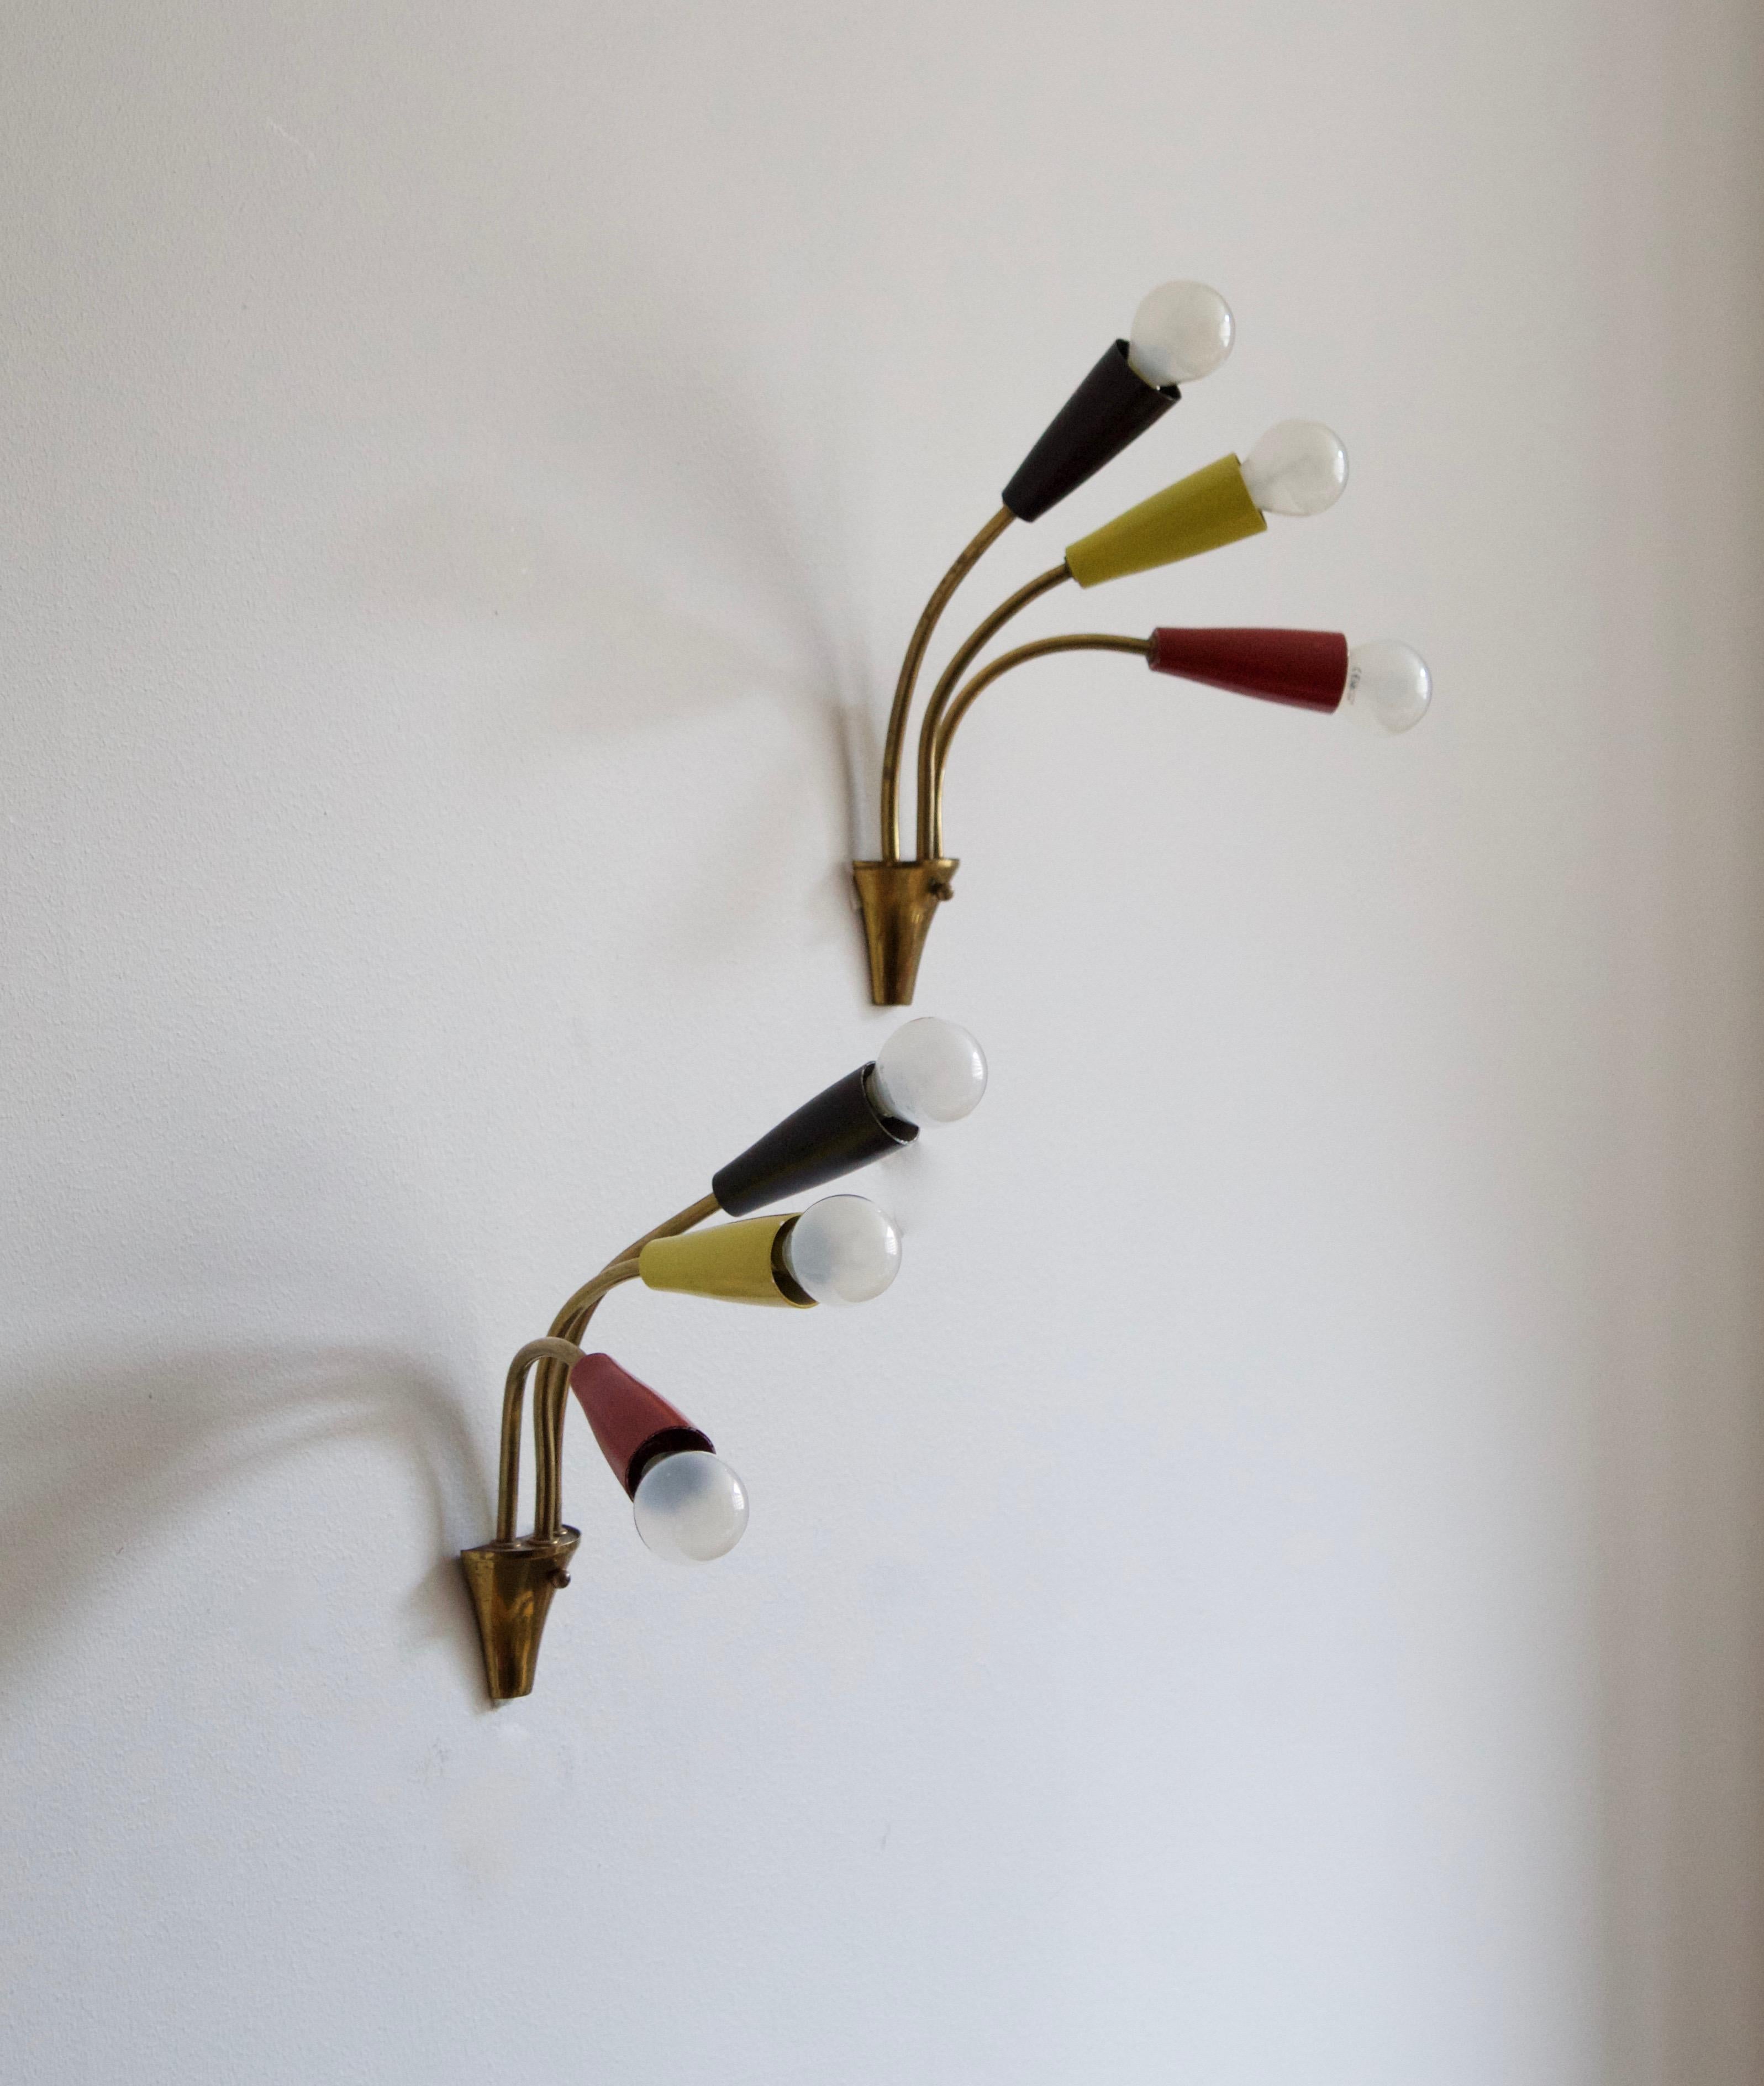 A pair of wall lights / sconces. Designed and produced in Italy, 1950s. Features brass and lacquered metal in red, yellow and black.